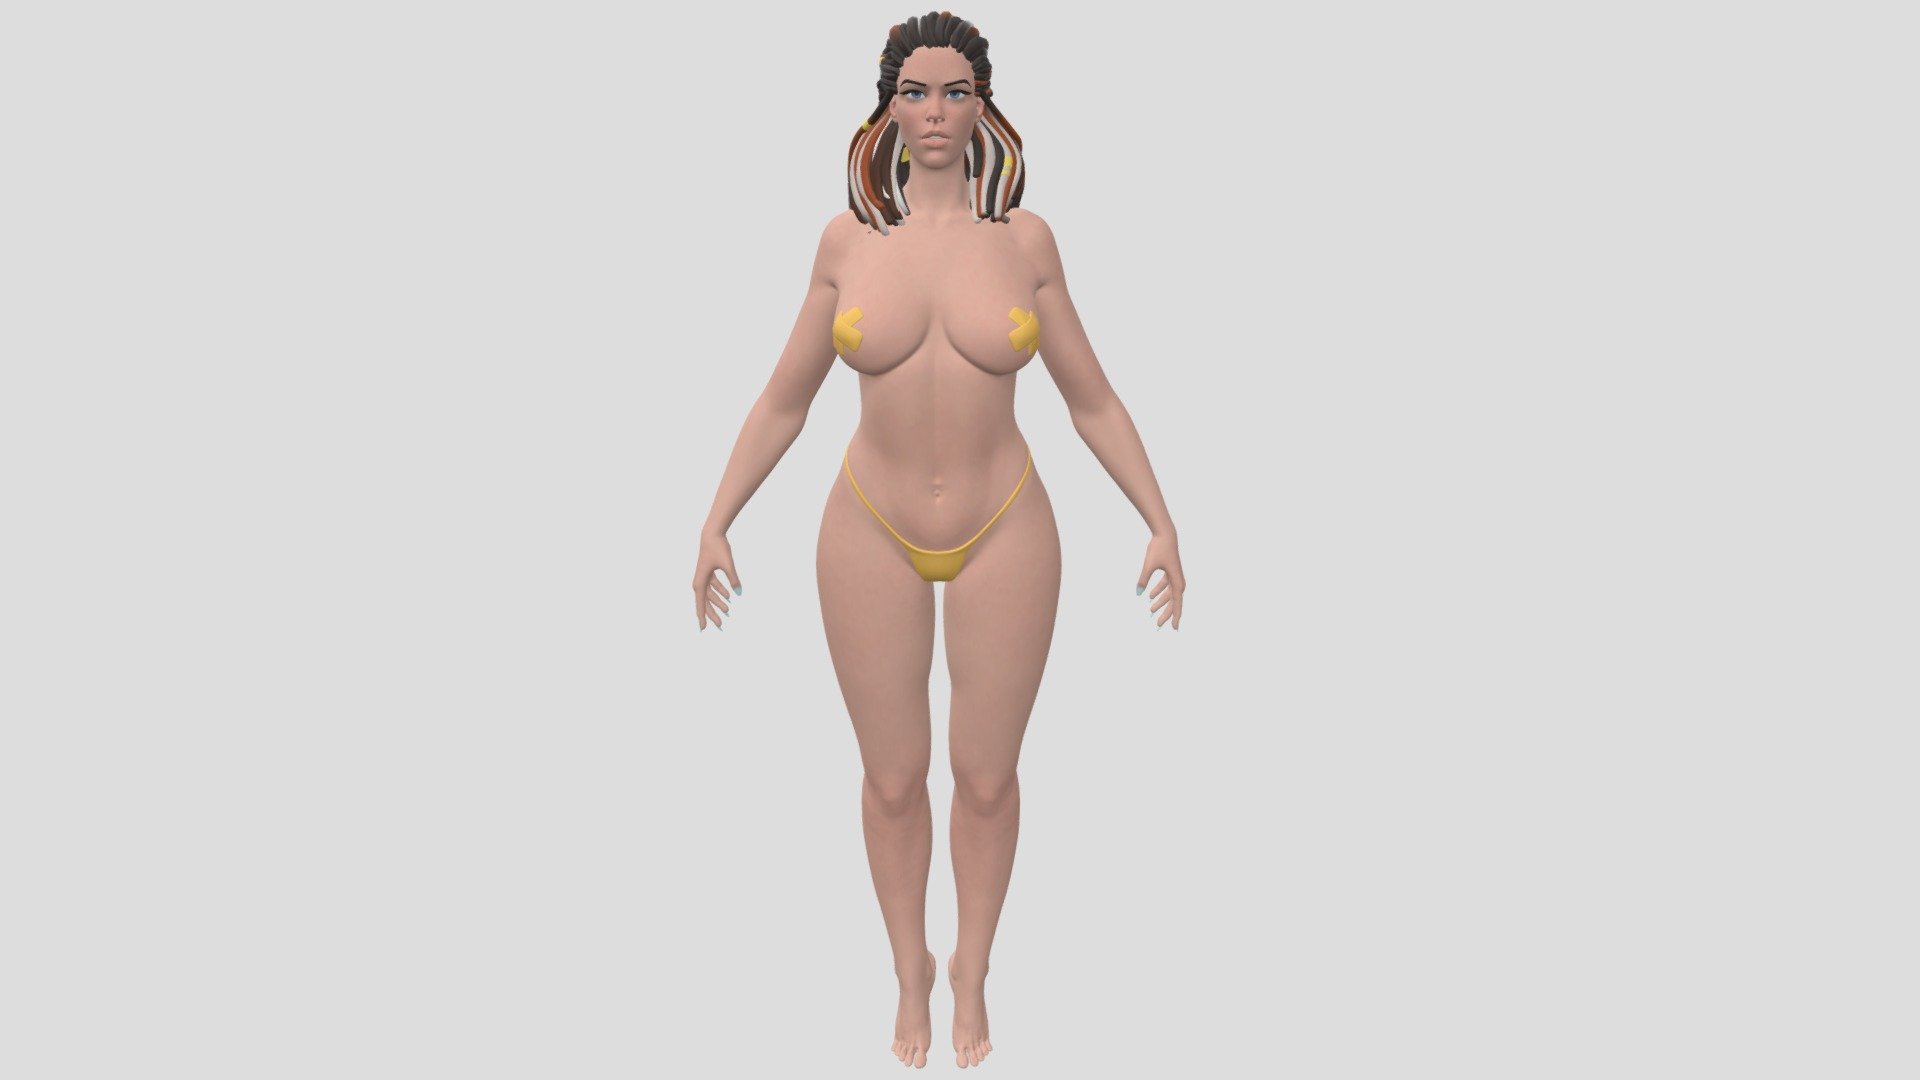 This sculpture is a study of the female anatomy, created in Zbrush. I aimed to capture the nuances and subtleties of the female form, highlighting its beauty and grace. From the delicate curves of the hips to the subtle muscles in the abdomen. I hope you enjoy viewing it as much as I enjoyed creating it 3d model